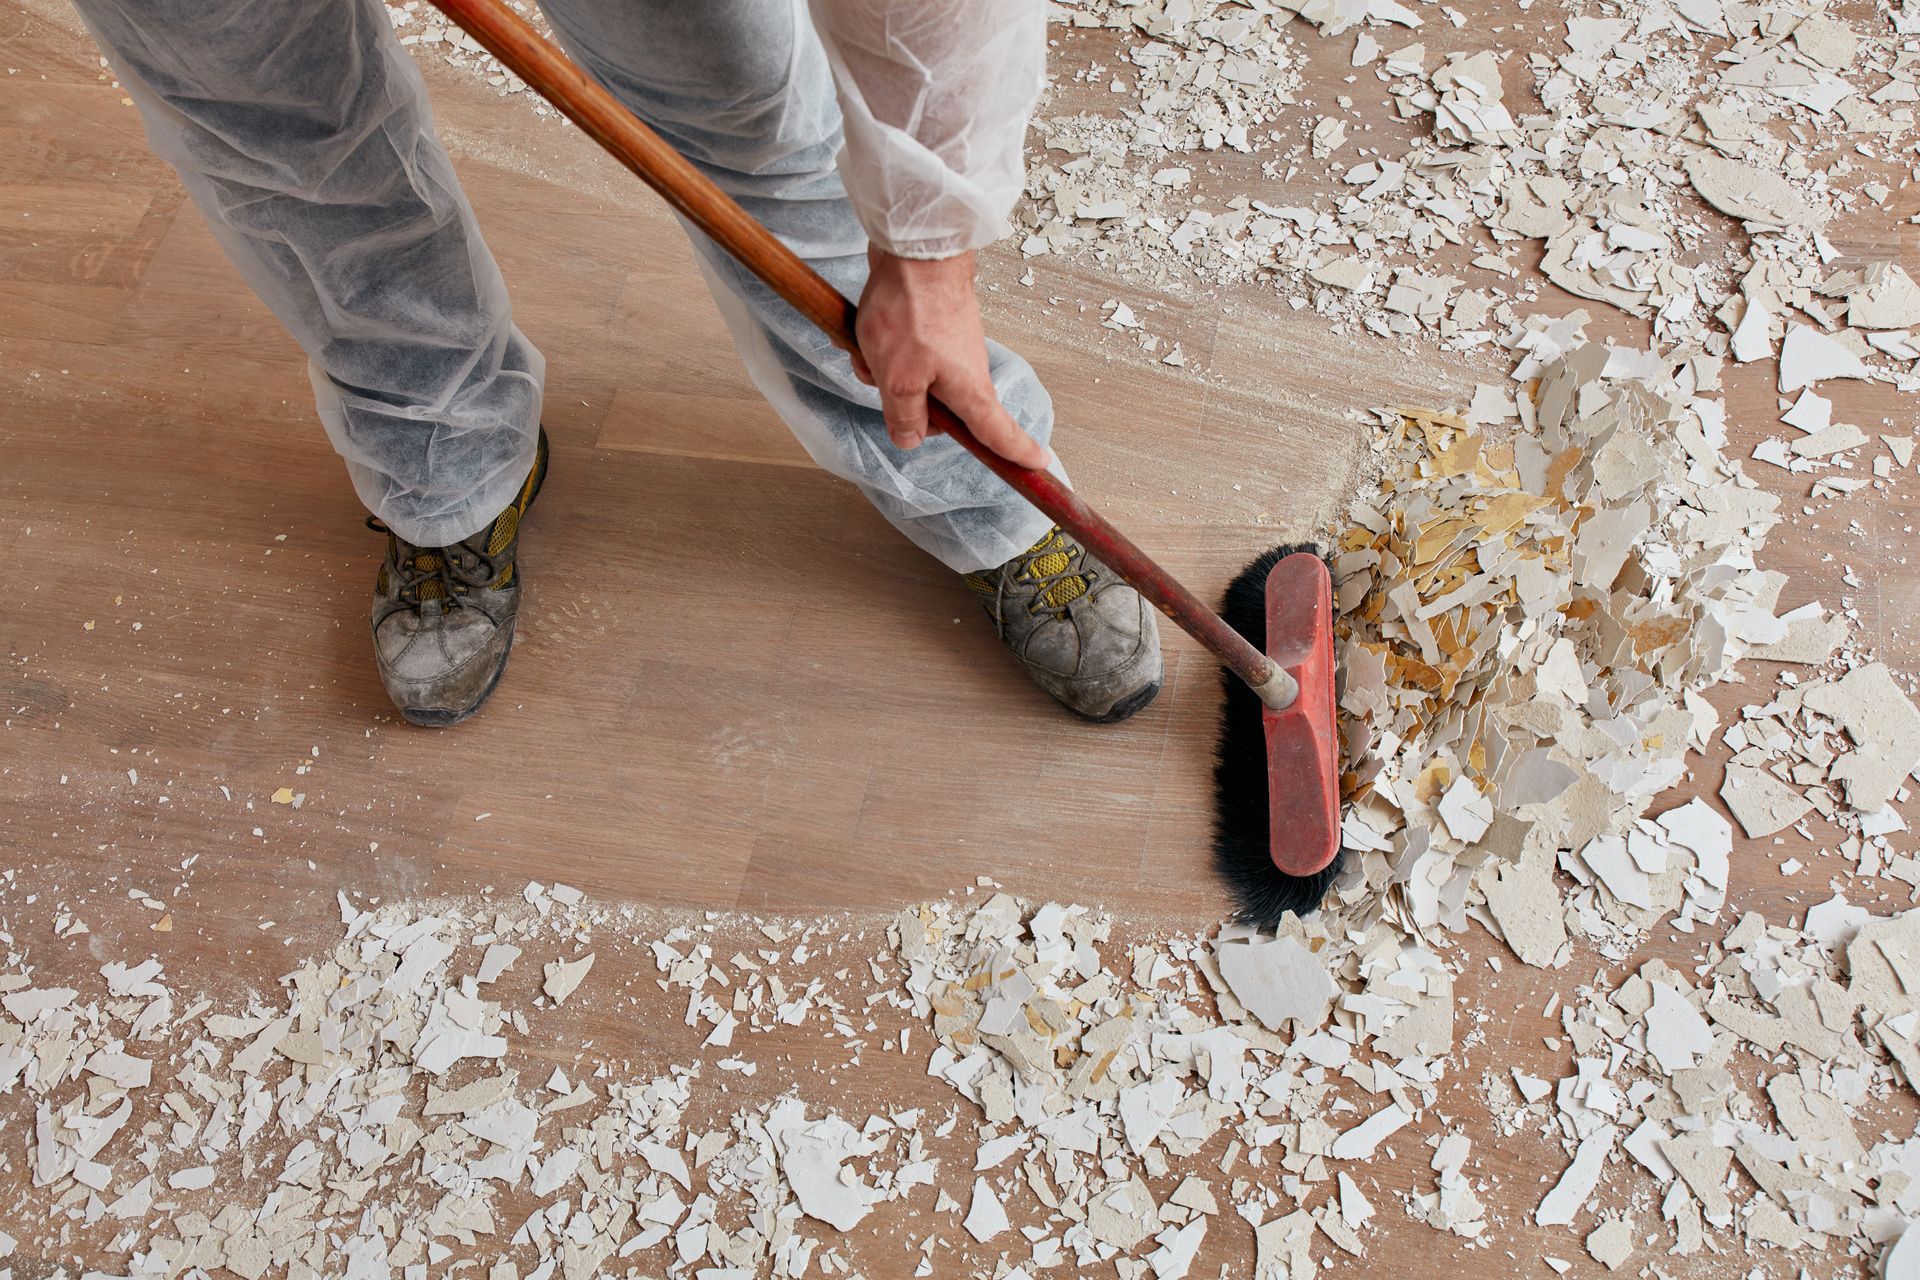 A man sweeping up construction debris from the nice wood floor after a construction project.